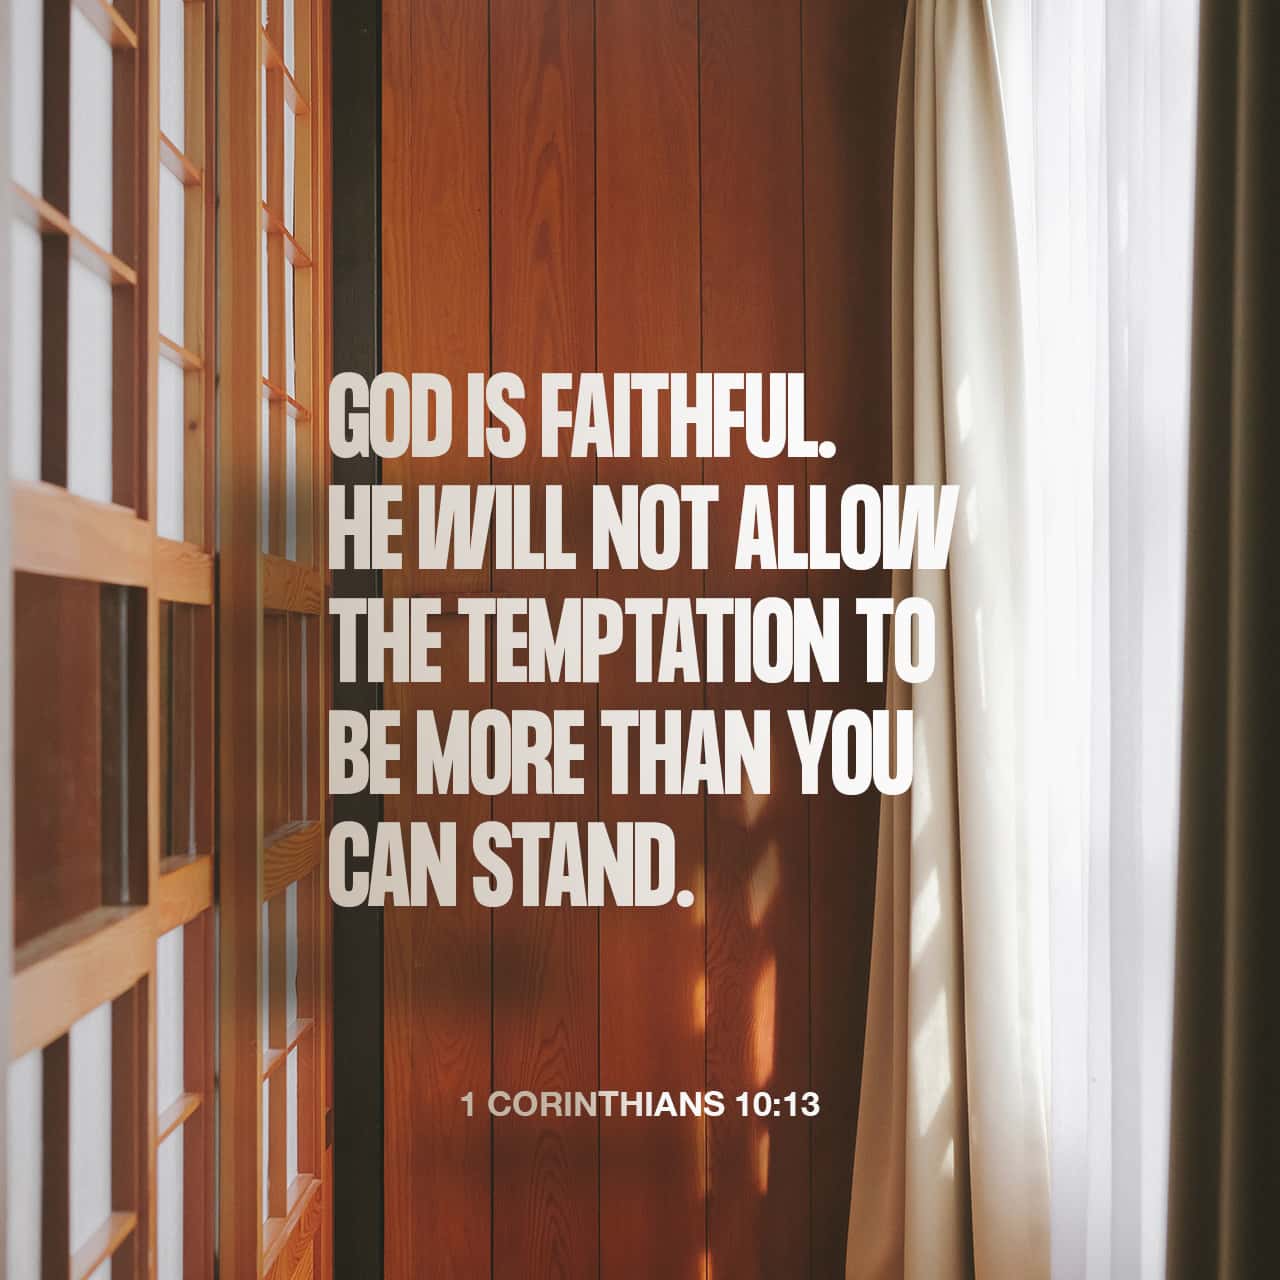 GODIS FAITHFUL HEWILL NOT ALLOVV THE TEMPTATION T0] BEMORE THAN YOU CAN STAND: 1 CORINTHIANS 10:13